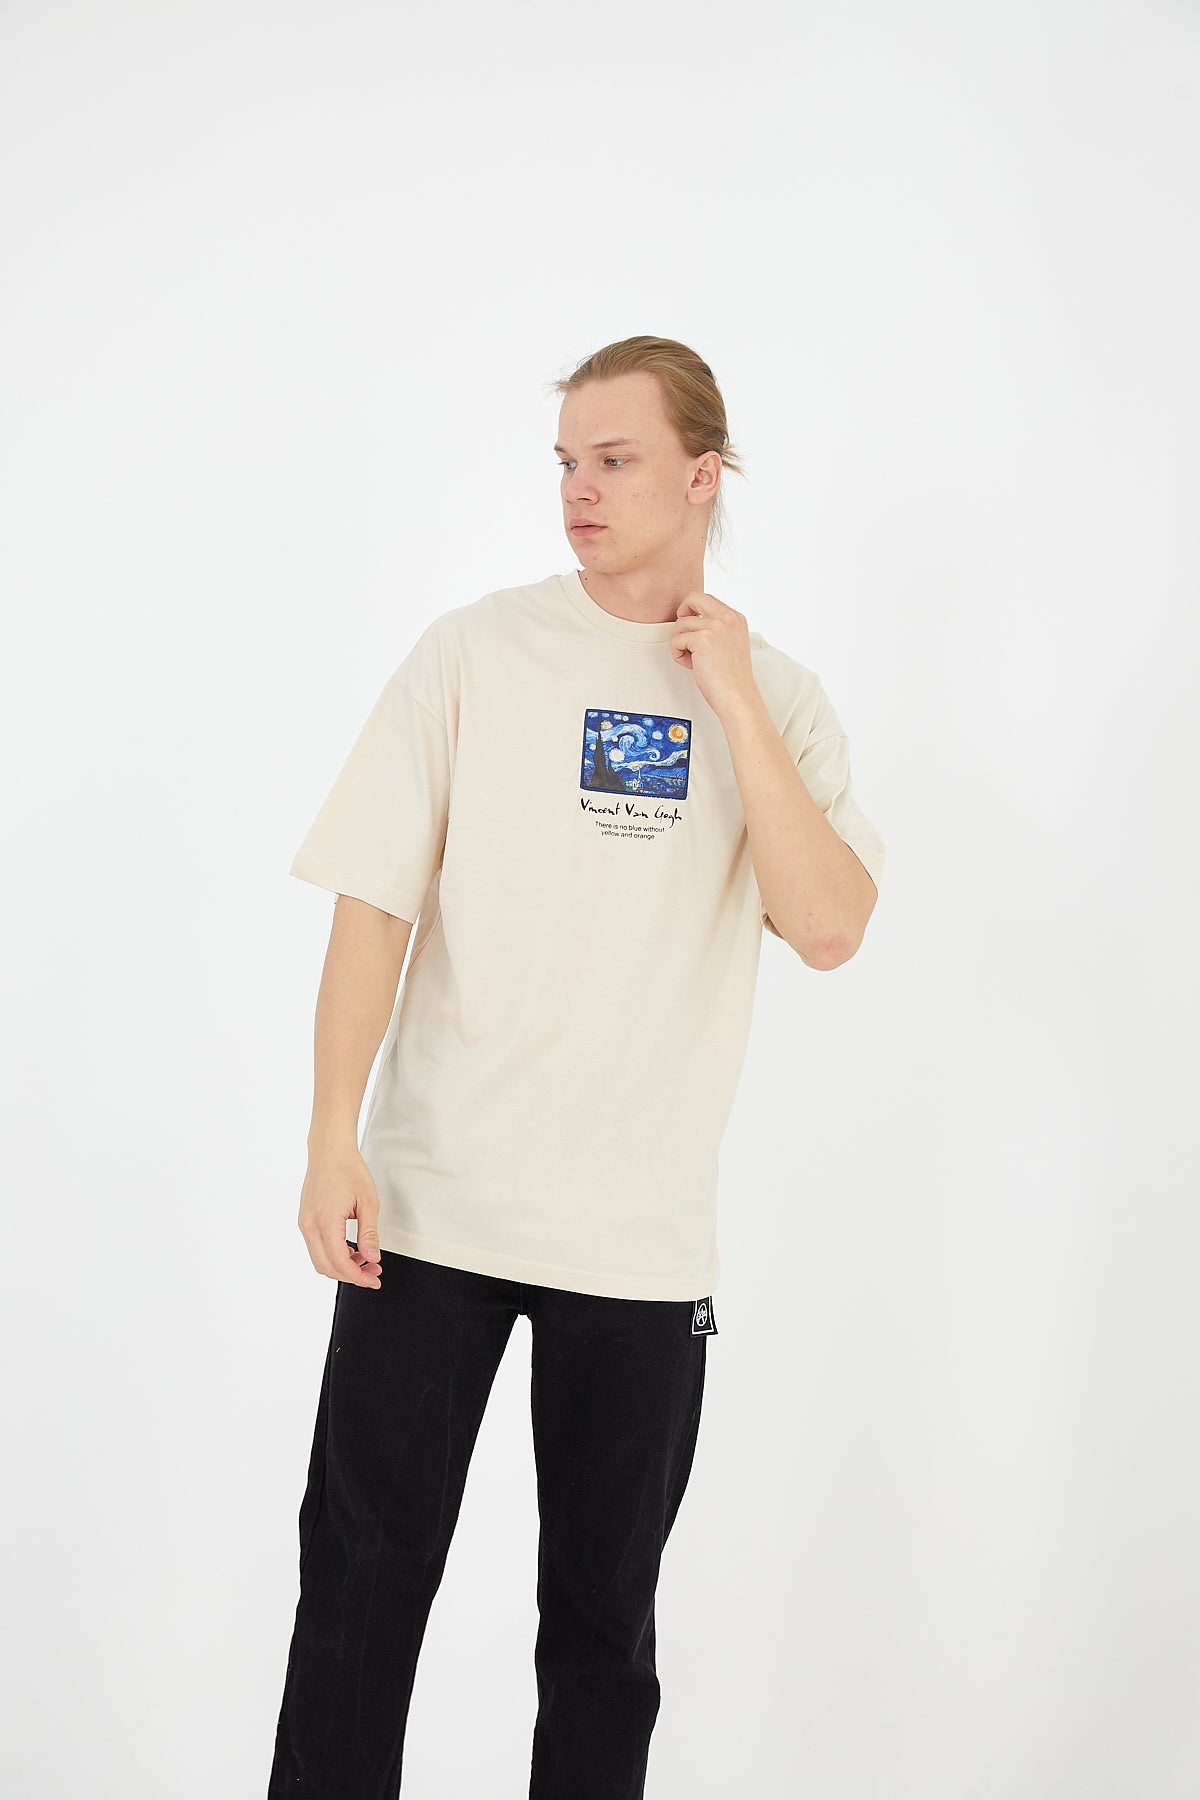 T-SHIRT - THE HILAL - OFF WHITE - DYS-Amsterdam